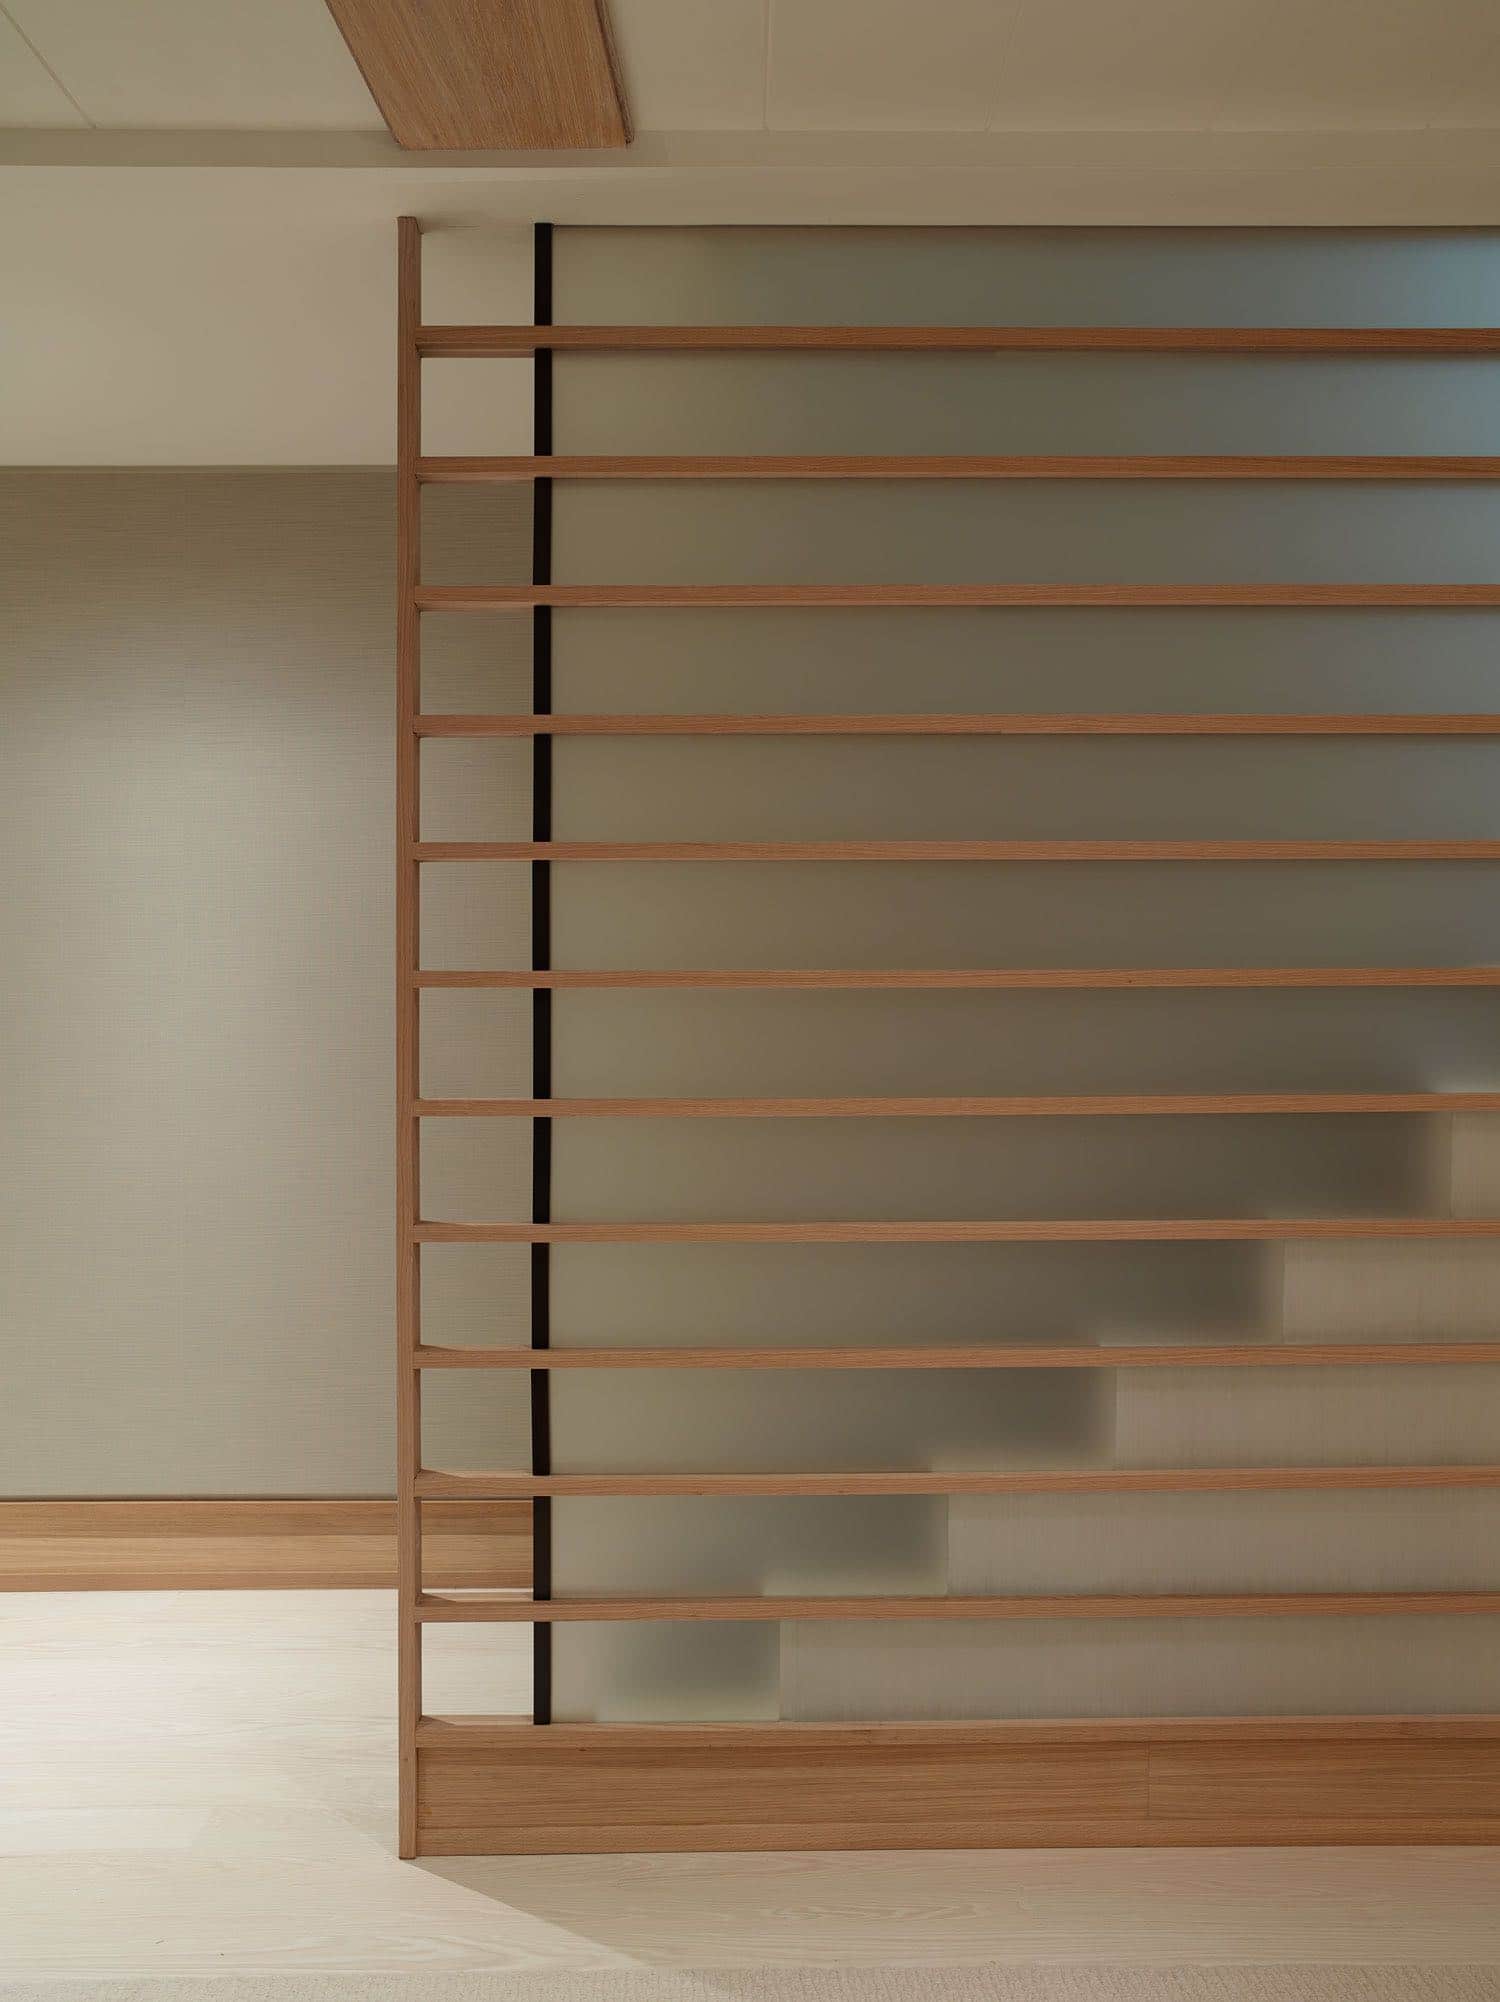 Designed by Carol Egan this image shows a detail of the stair design into the basement of the home.  Oak and etched glass by Bendheim Glass Co. create a translucent wall that aligns with the stair threads beyond.